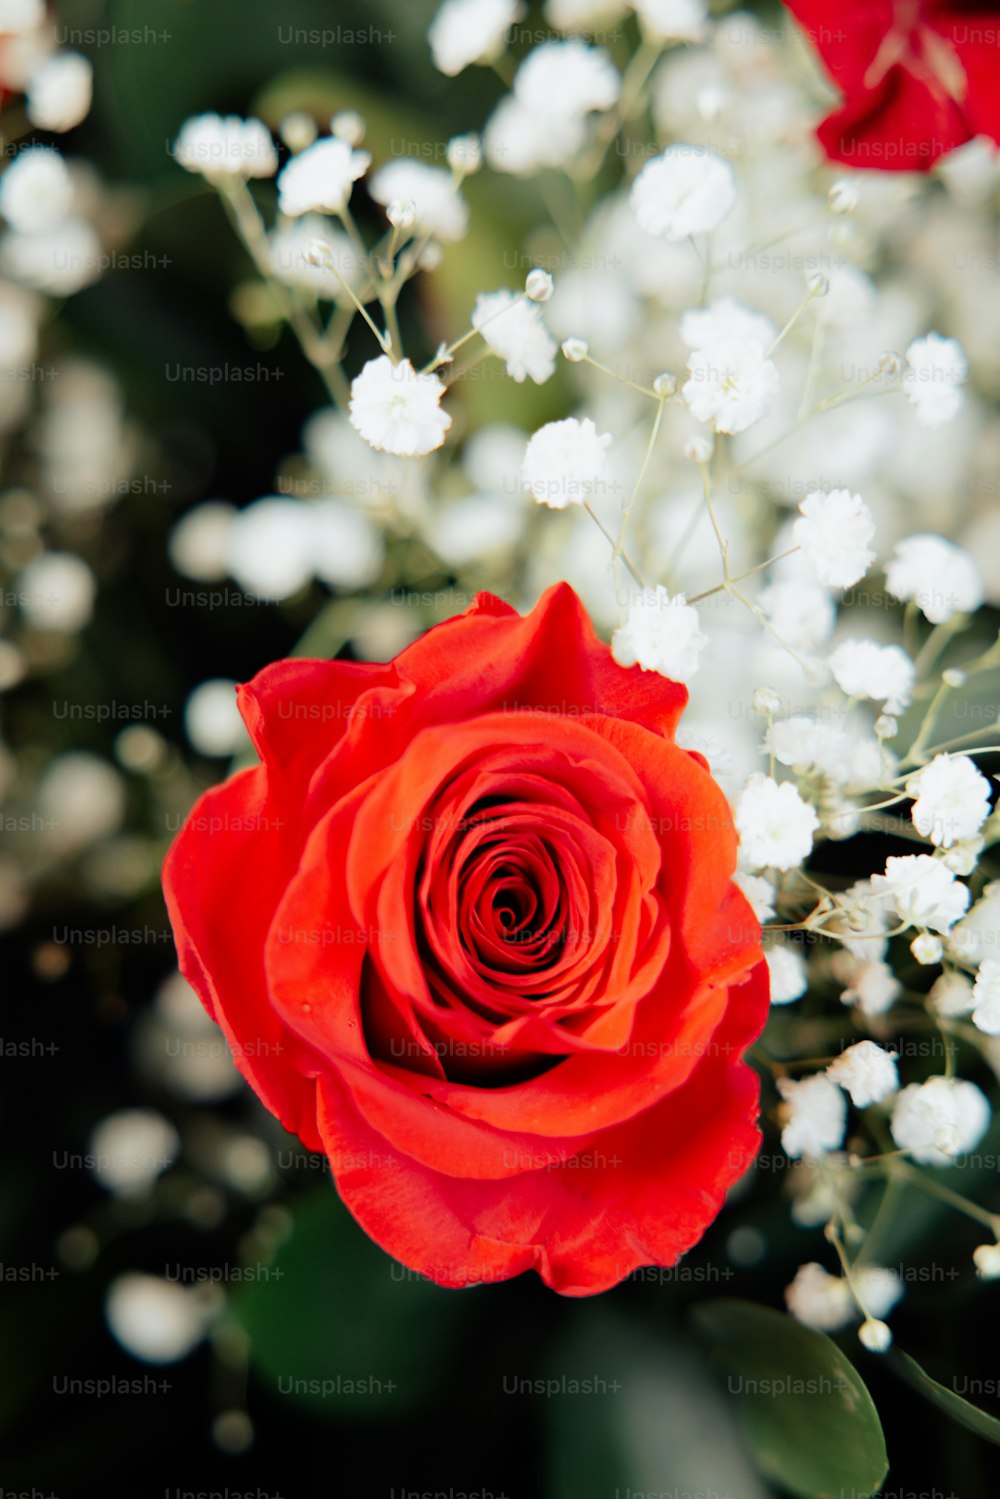 a close up of a red rose and white flowers